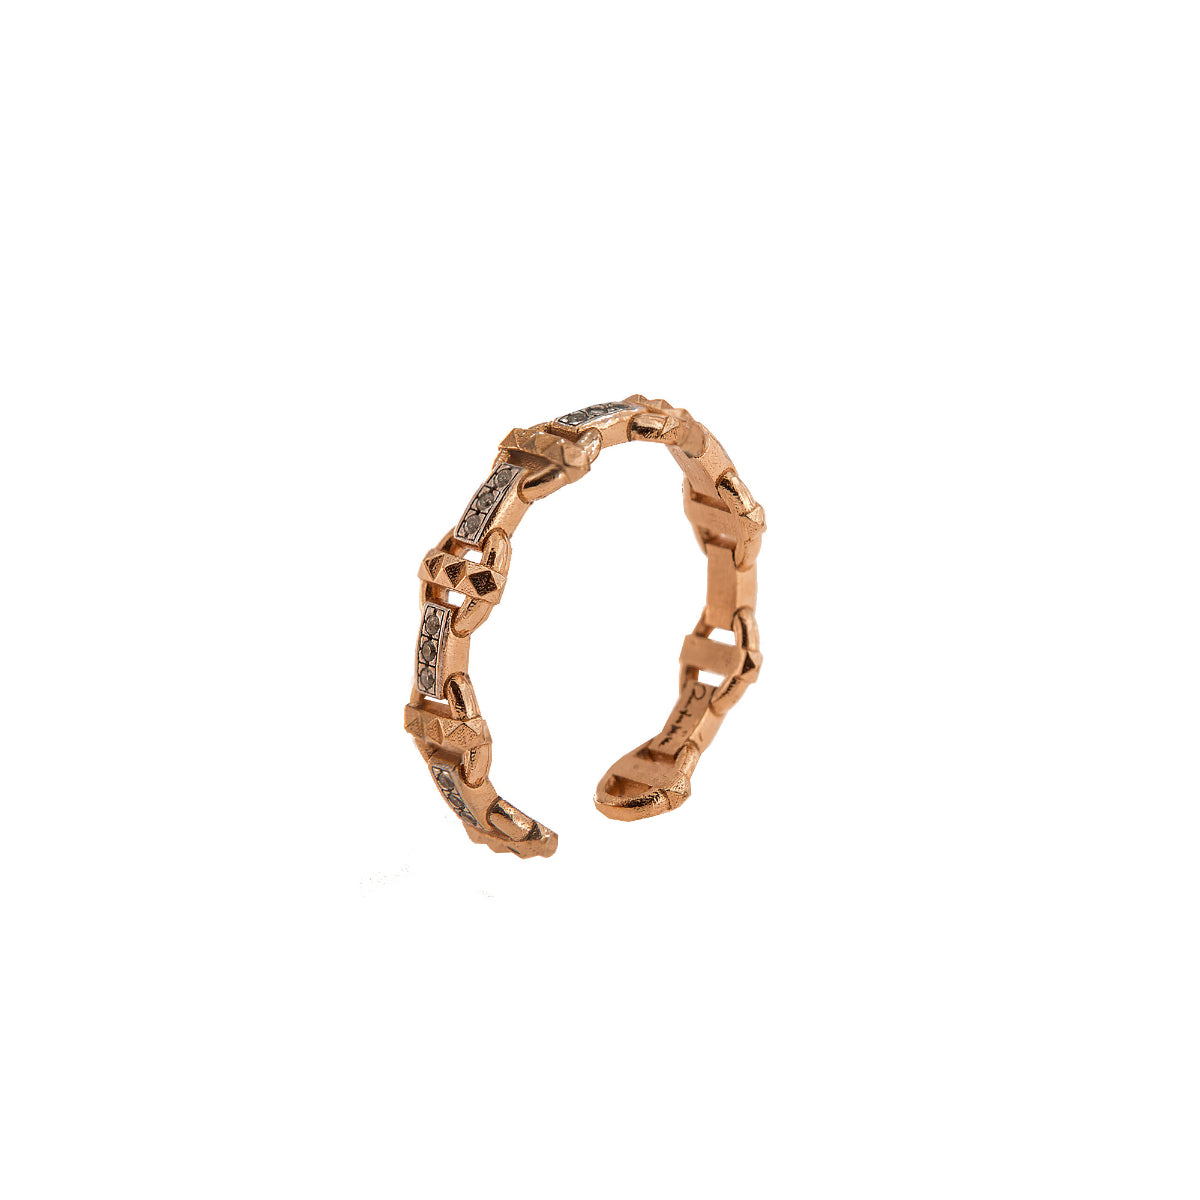 Rings - Ring with marine links and studs - 2 | Rue des Mille